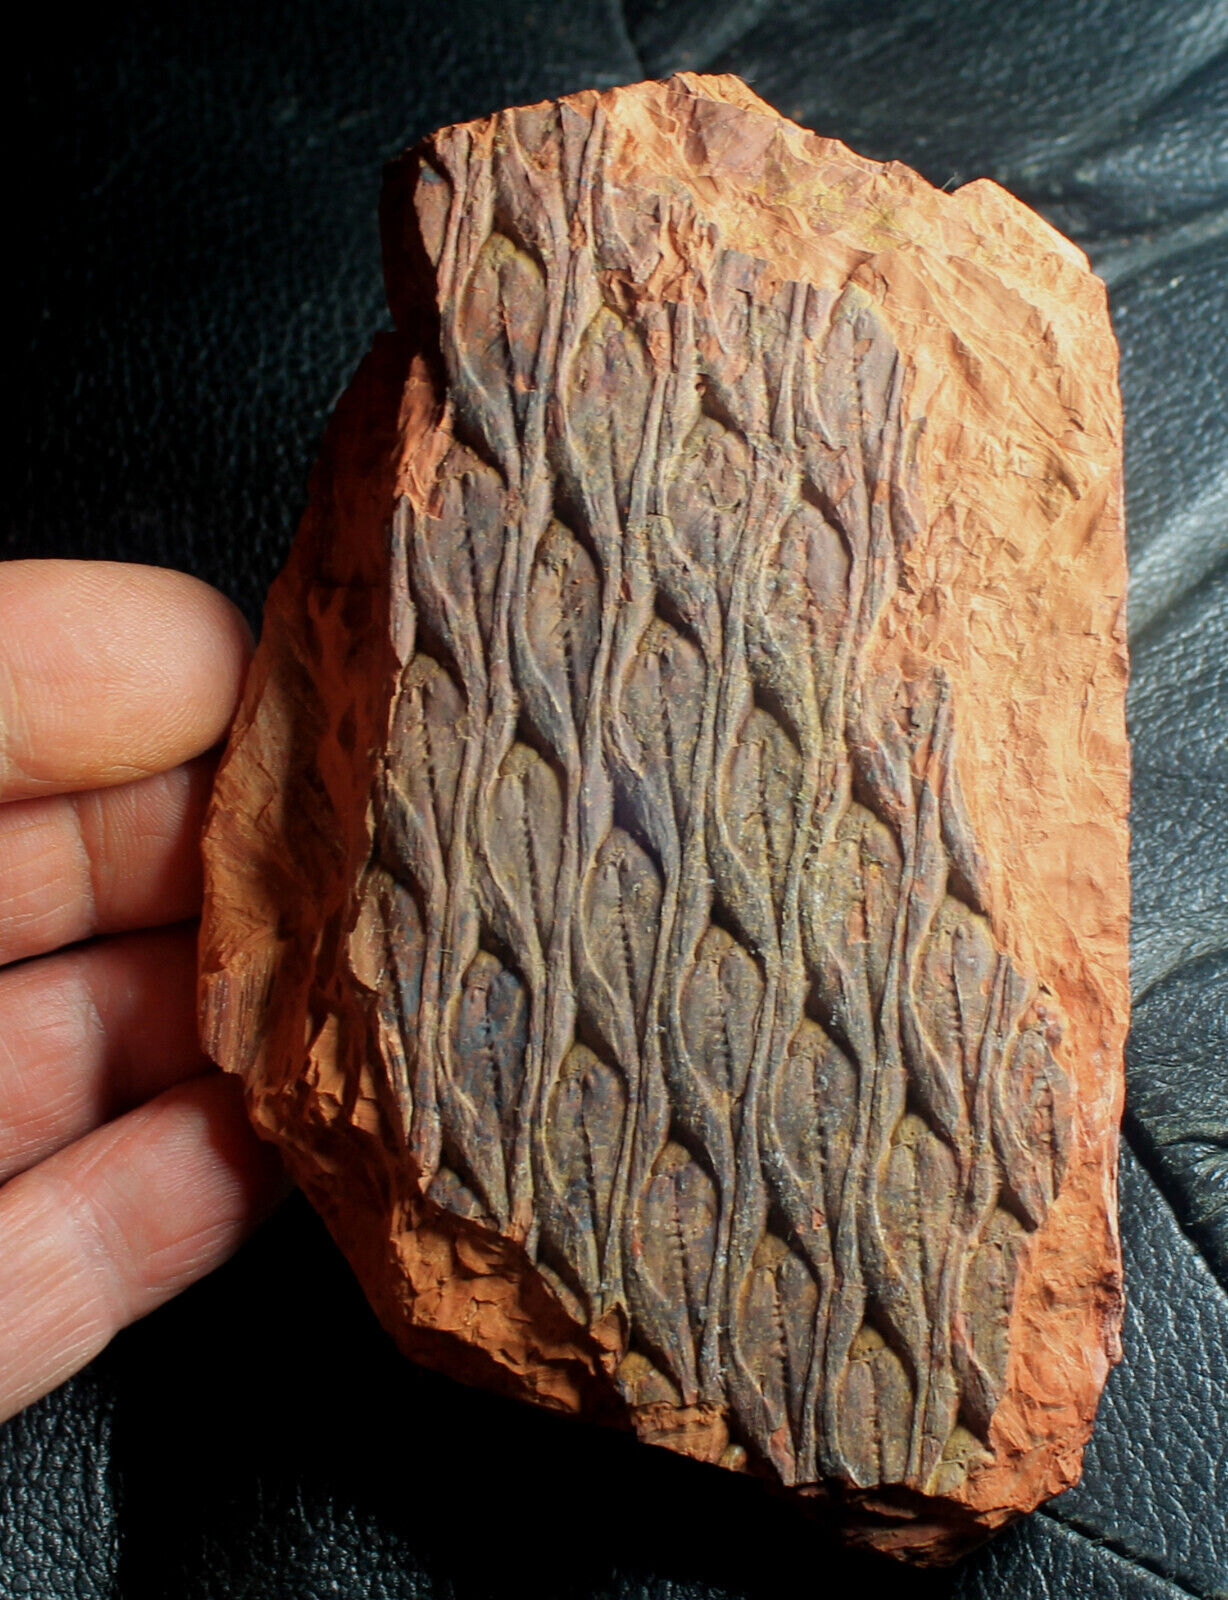 Lepidodendron aculeatum - Beautiful preserved Carboniferous fossil bark